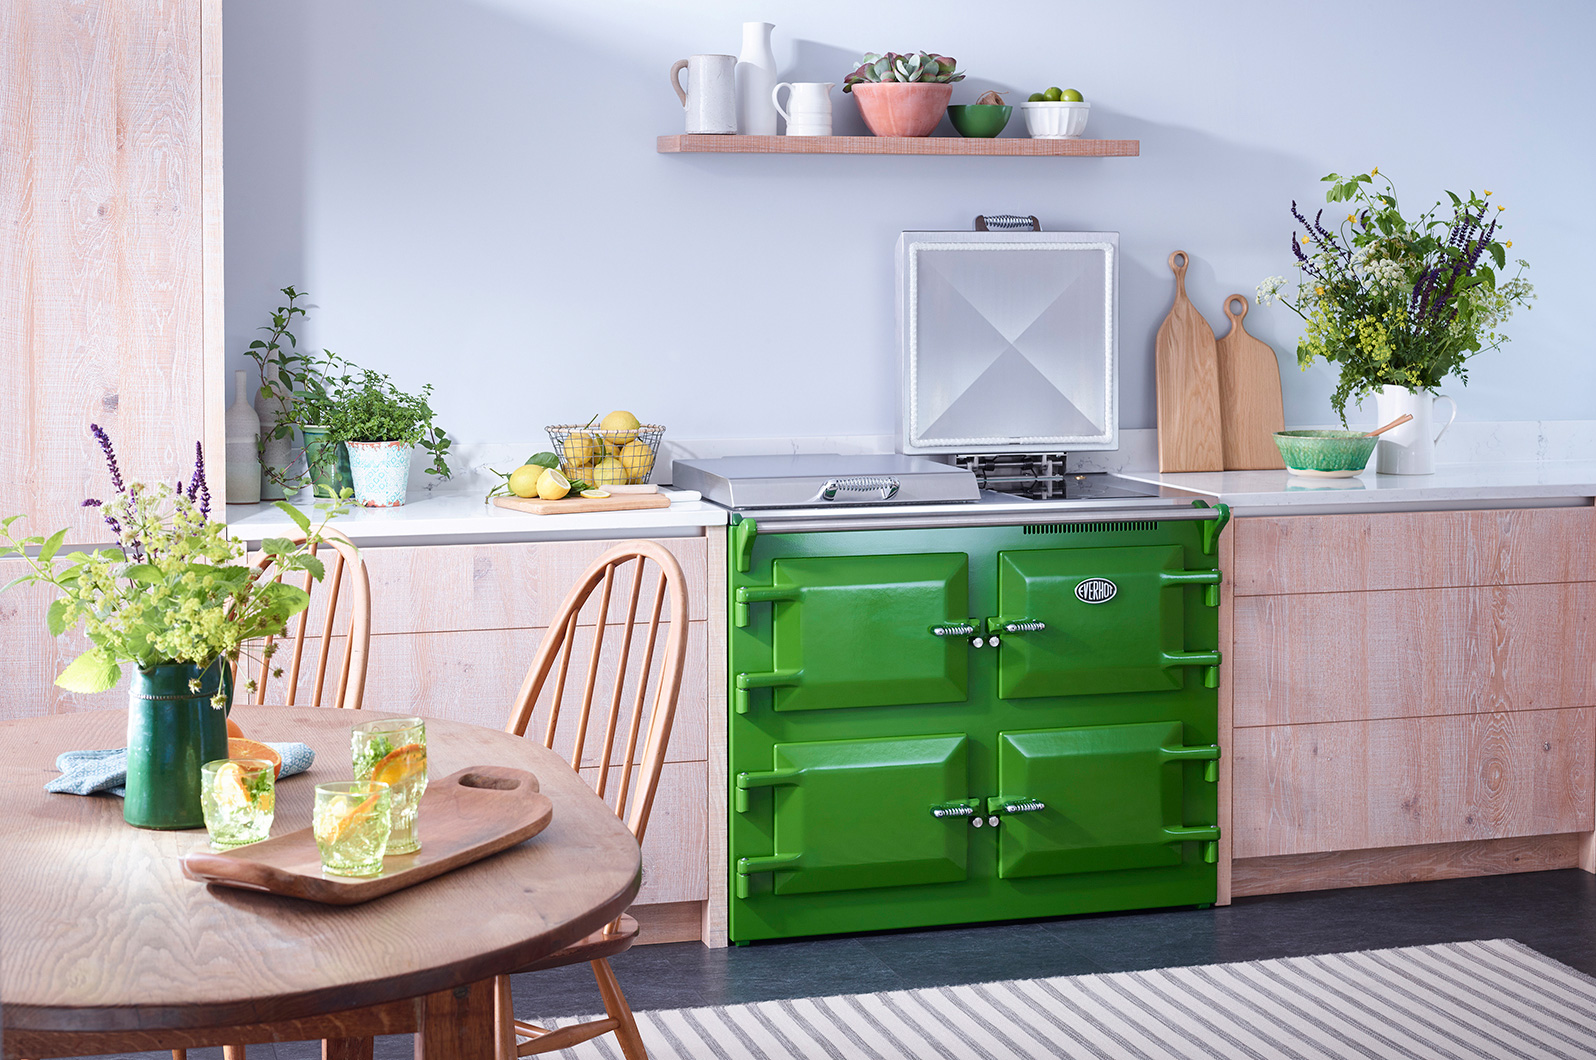 New colour launch for Everhot cookers.